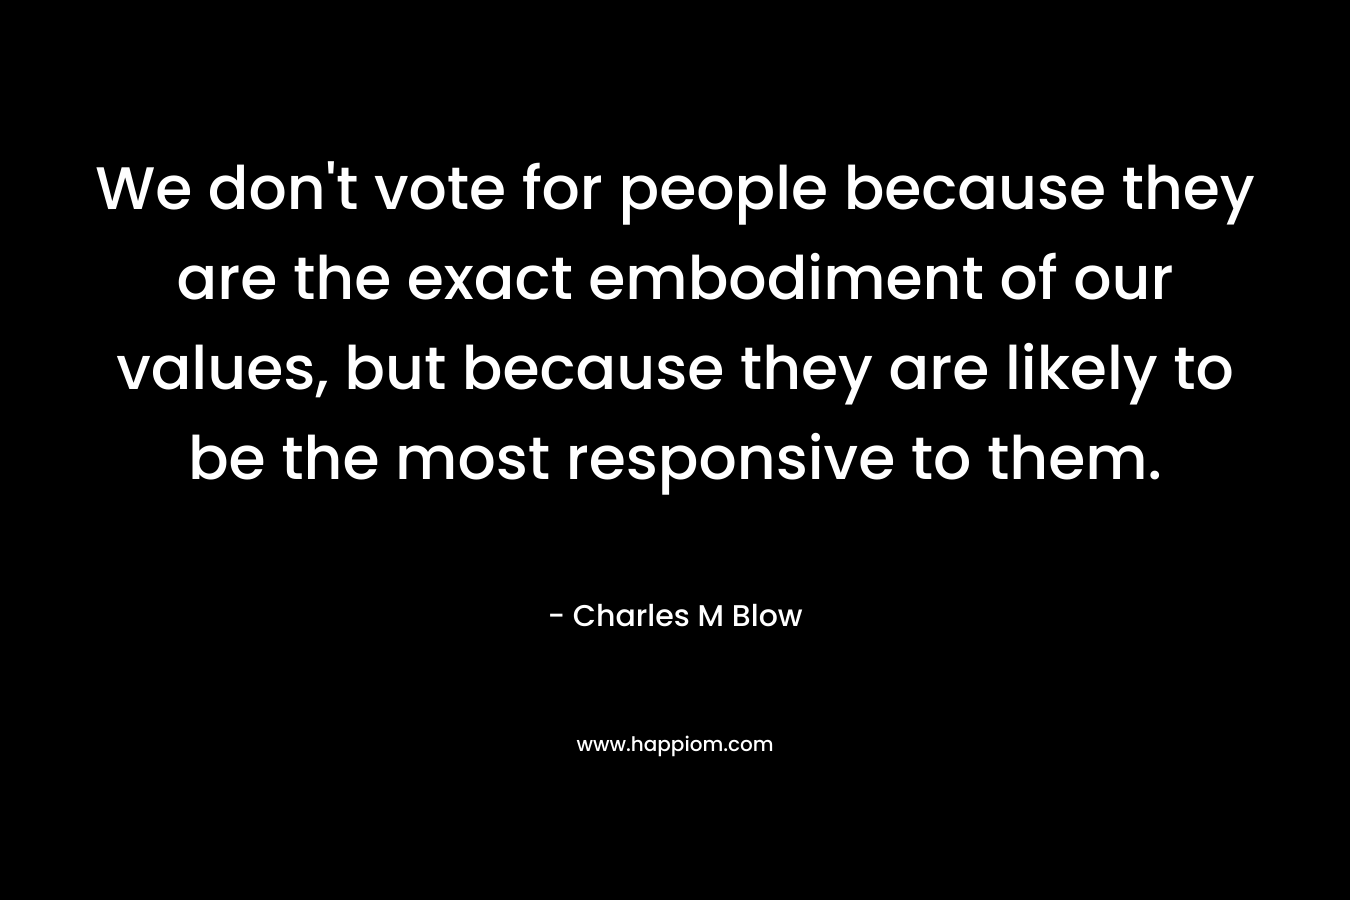 We don’t vote for people because they are the exact embodiment of our values, but because they are likely to be the most responsive to them. – Charles M Blow